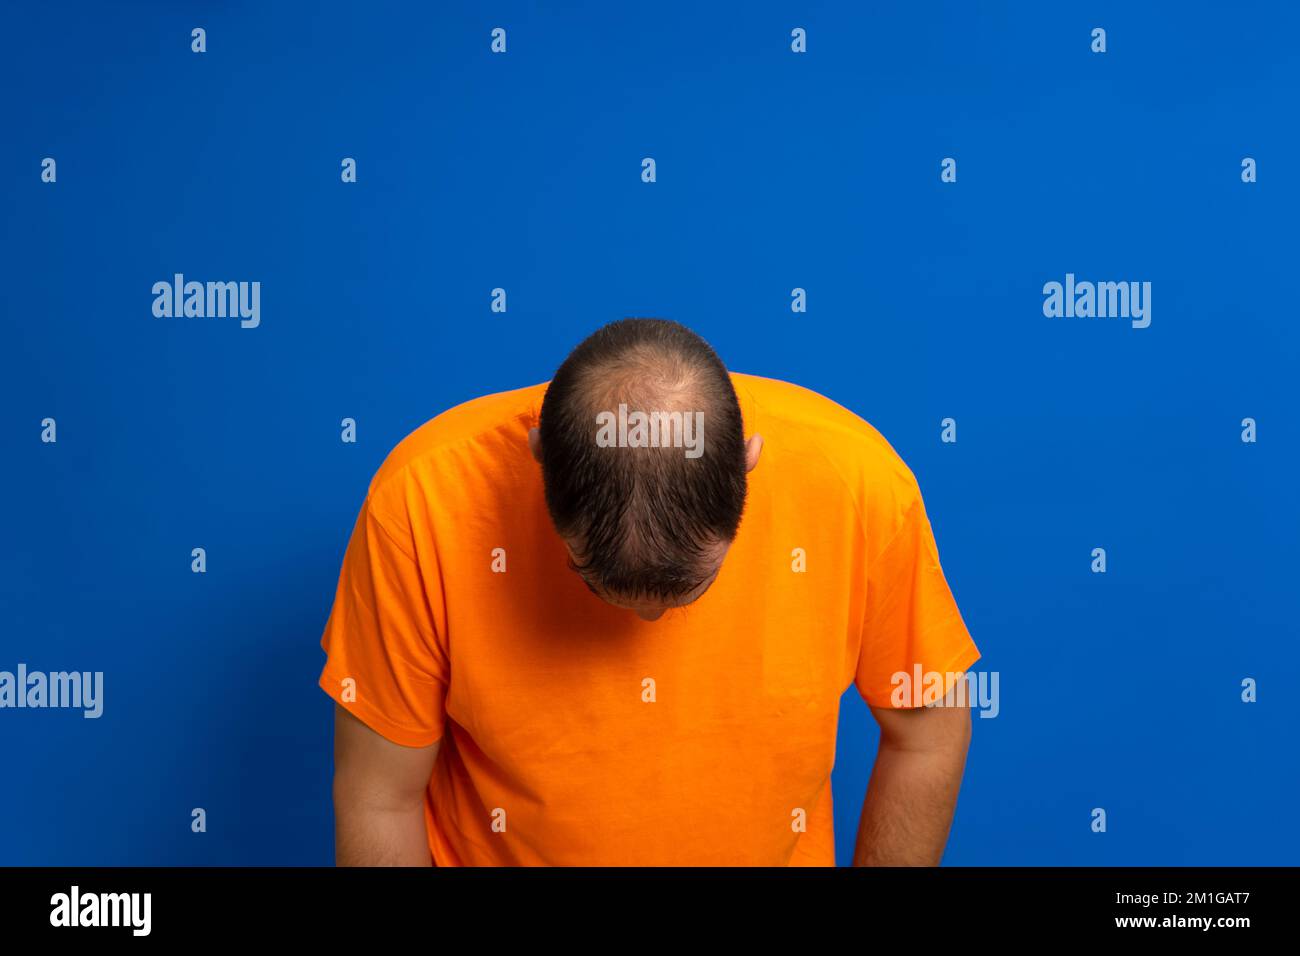 Man in an orange t-shirt leaning his head forward to reveal his bald spot, isolated on blue studio background. Stock Photo